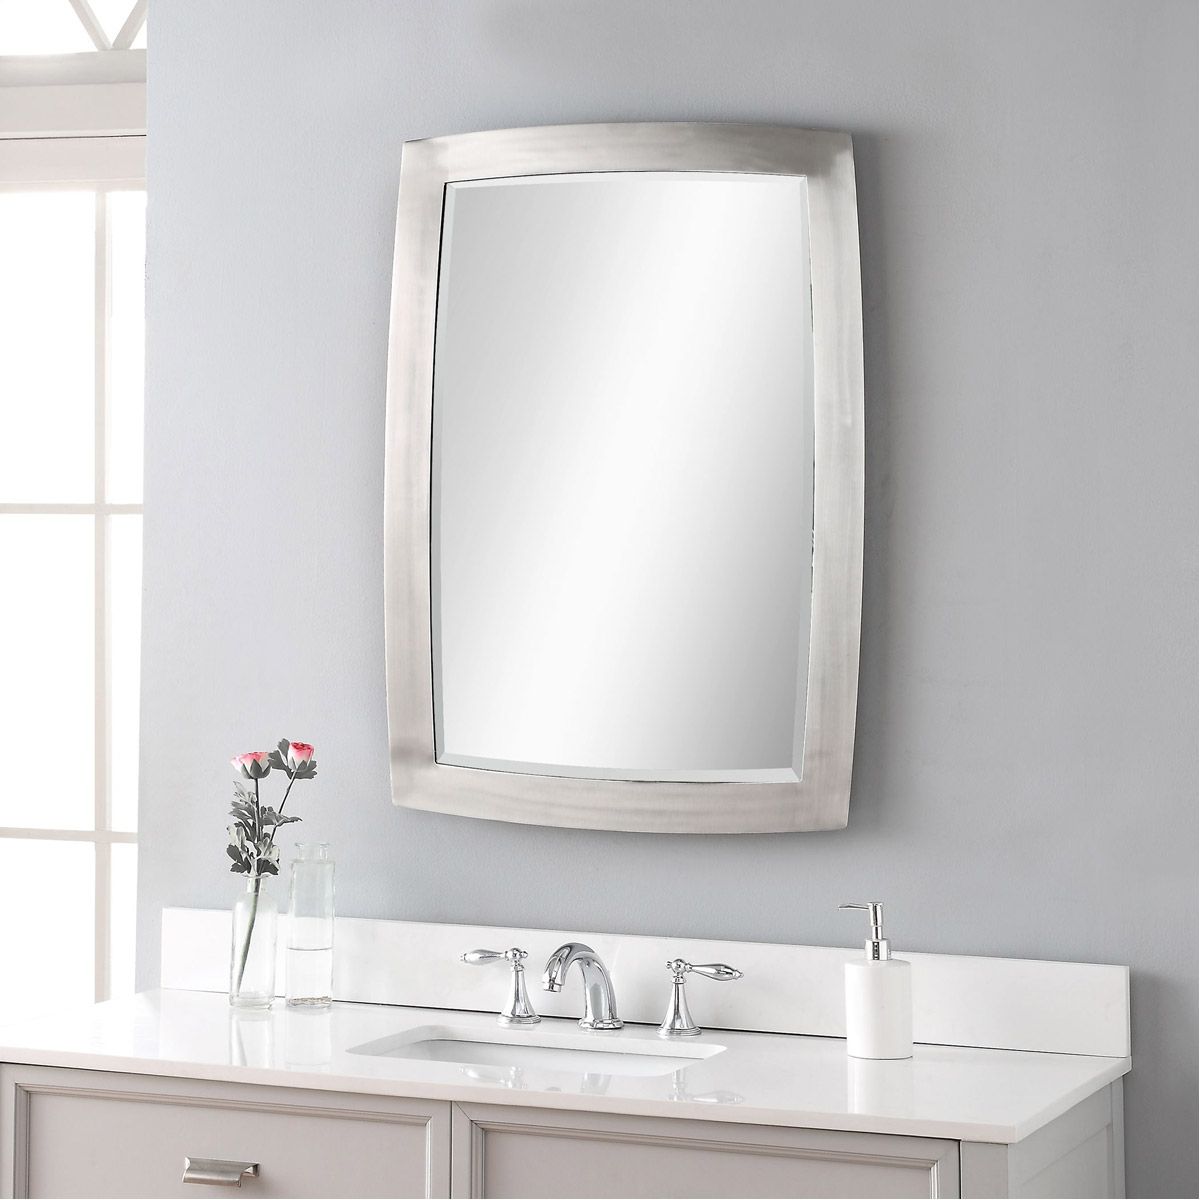 Uttermost 09618 Haskill 34 X 24 Inch Brushed Nickel Wall Mirror | Ebay Within Drake Brushed Steel Wall Mirrors (View 9 of 15)